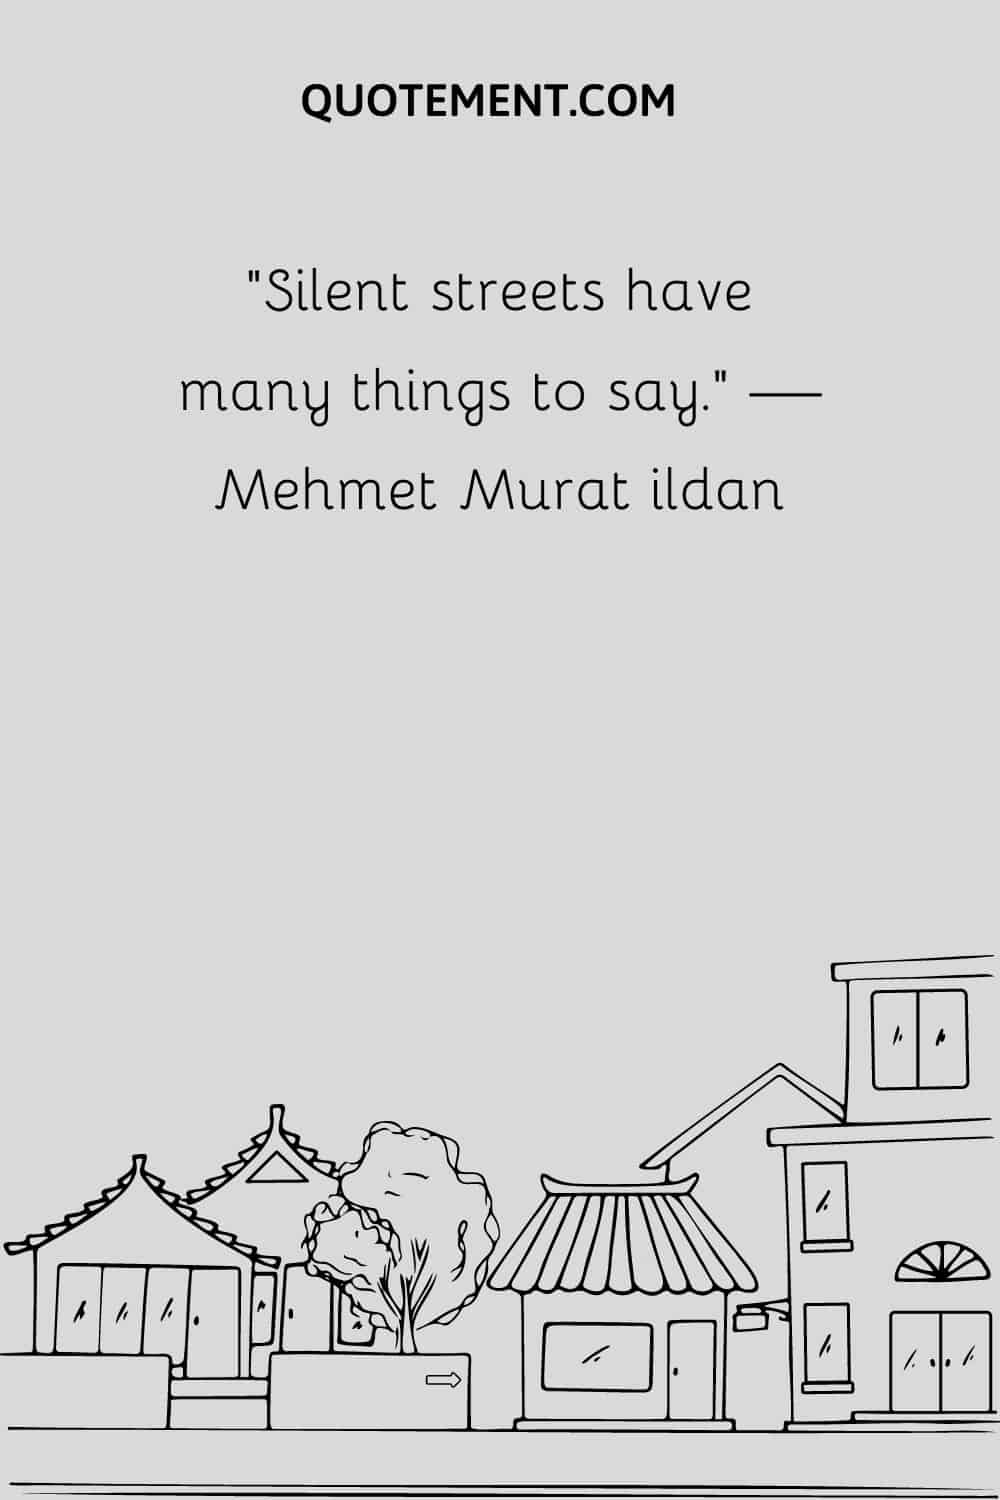 Silent streets have many things to say.